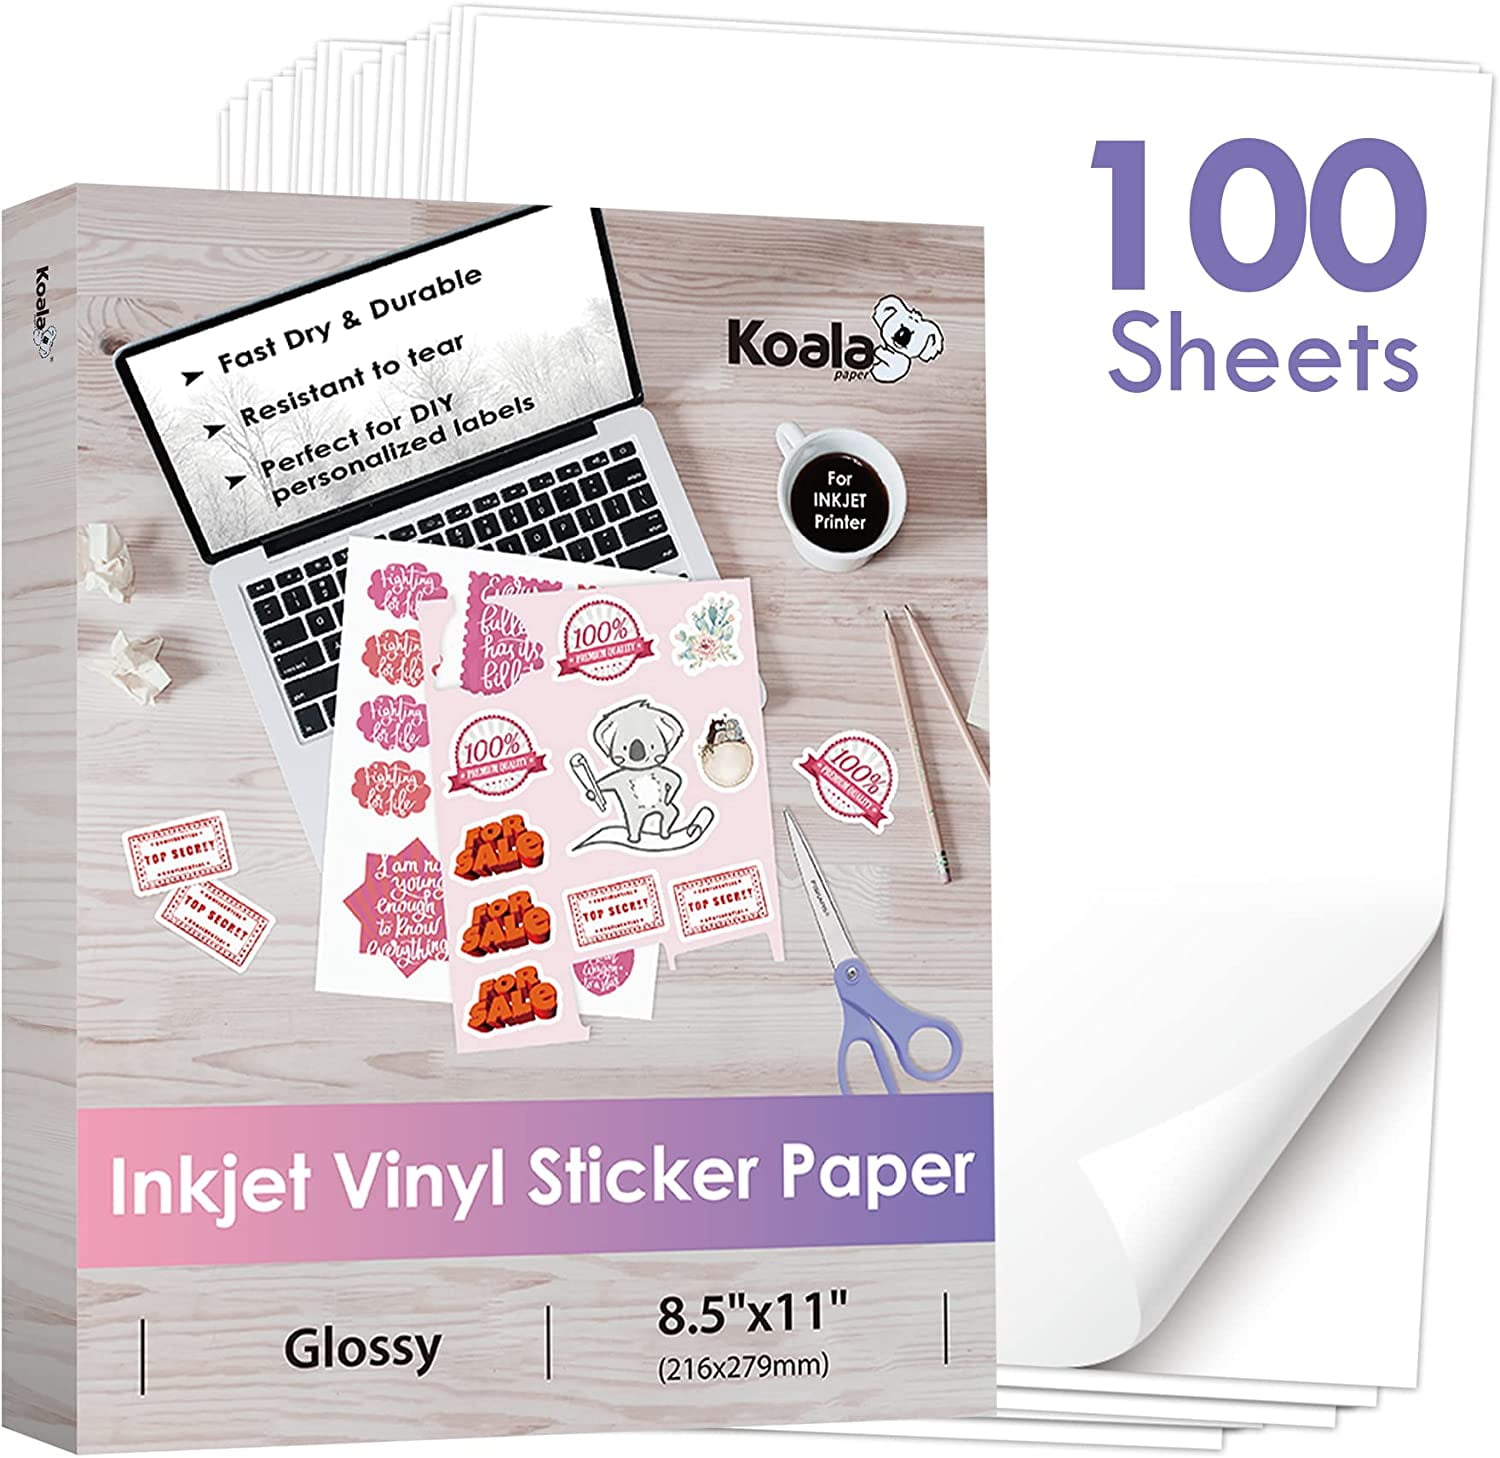 Koala Sticker Paper Matte White, 8.5x11 Inch 100 Sheets Printable Full  Sheet Label Paper for Inkjet Printers, Work with Cutter Machines 